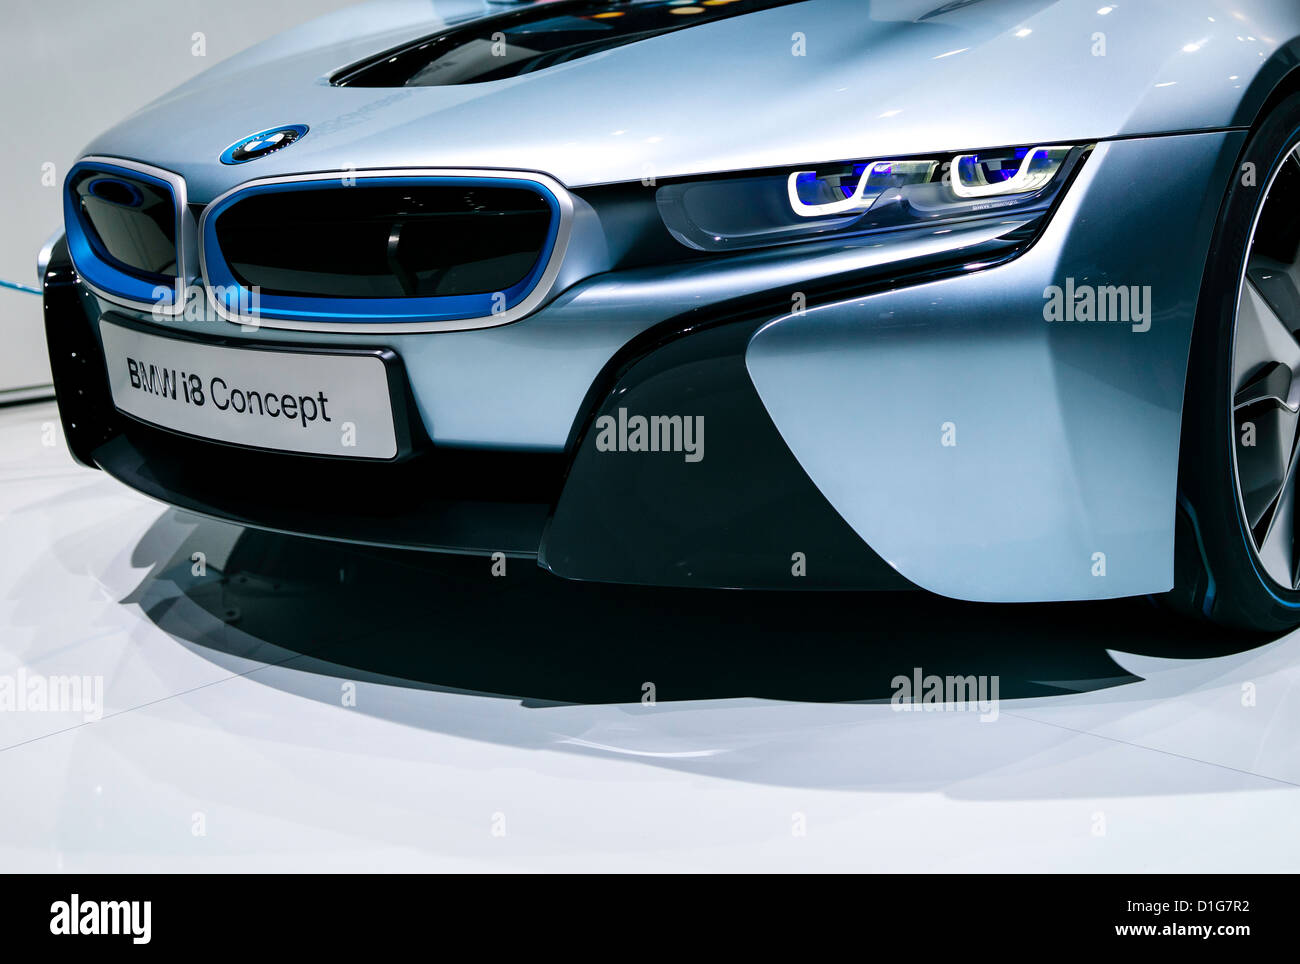 Electric sports car concept, BMW i8, at 2012 North American International Auto Show in Detroit Stock Photo